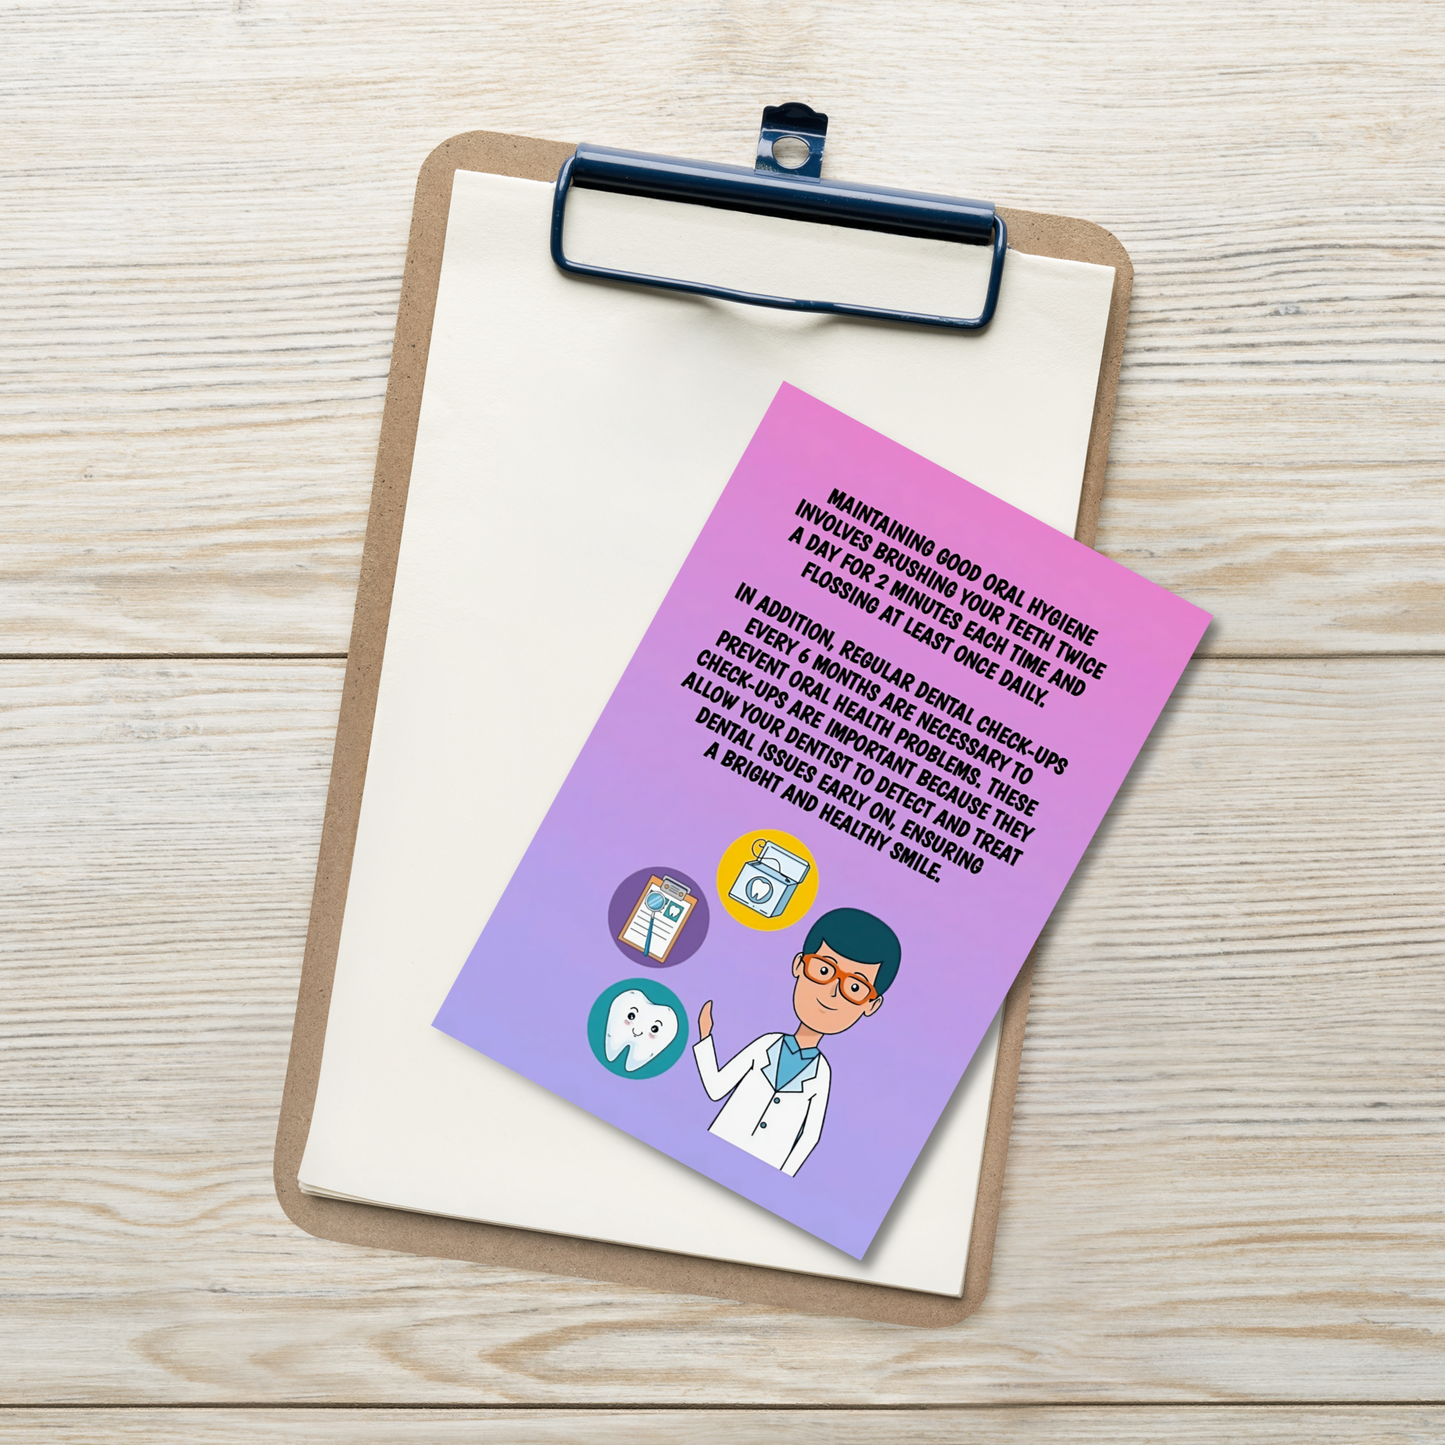 Oral Hygiene Cards- Maintaining Good Oral Hygiene Involves Brushing Your Teeth Twice A Day For Two Minutes Each Time And Flossing At Least Once Daily.